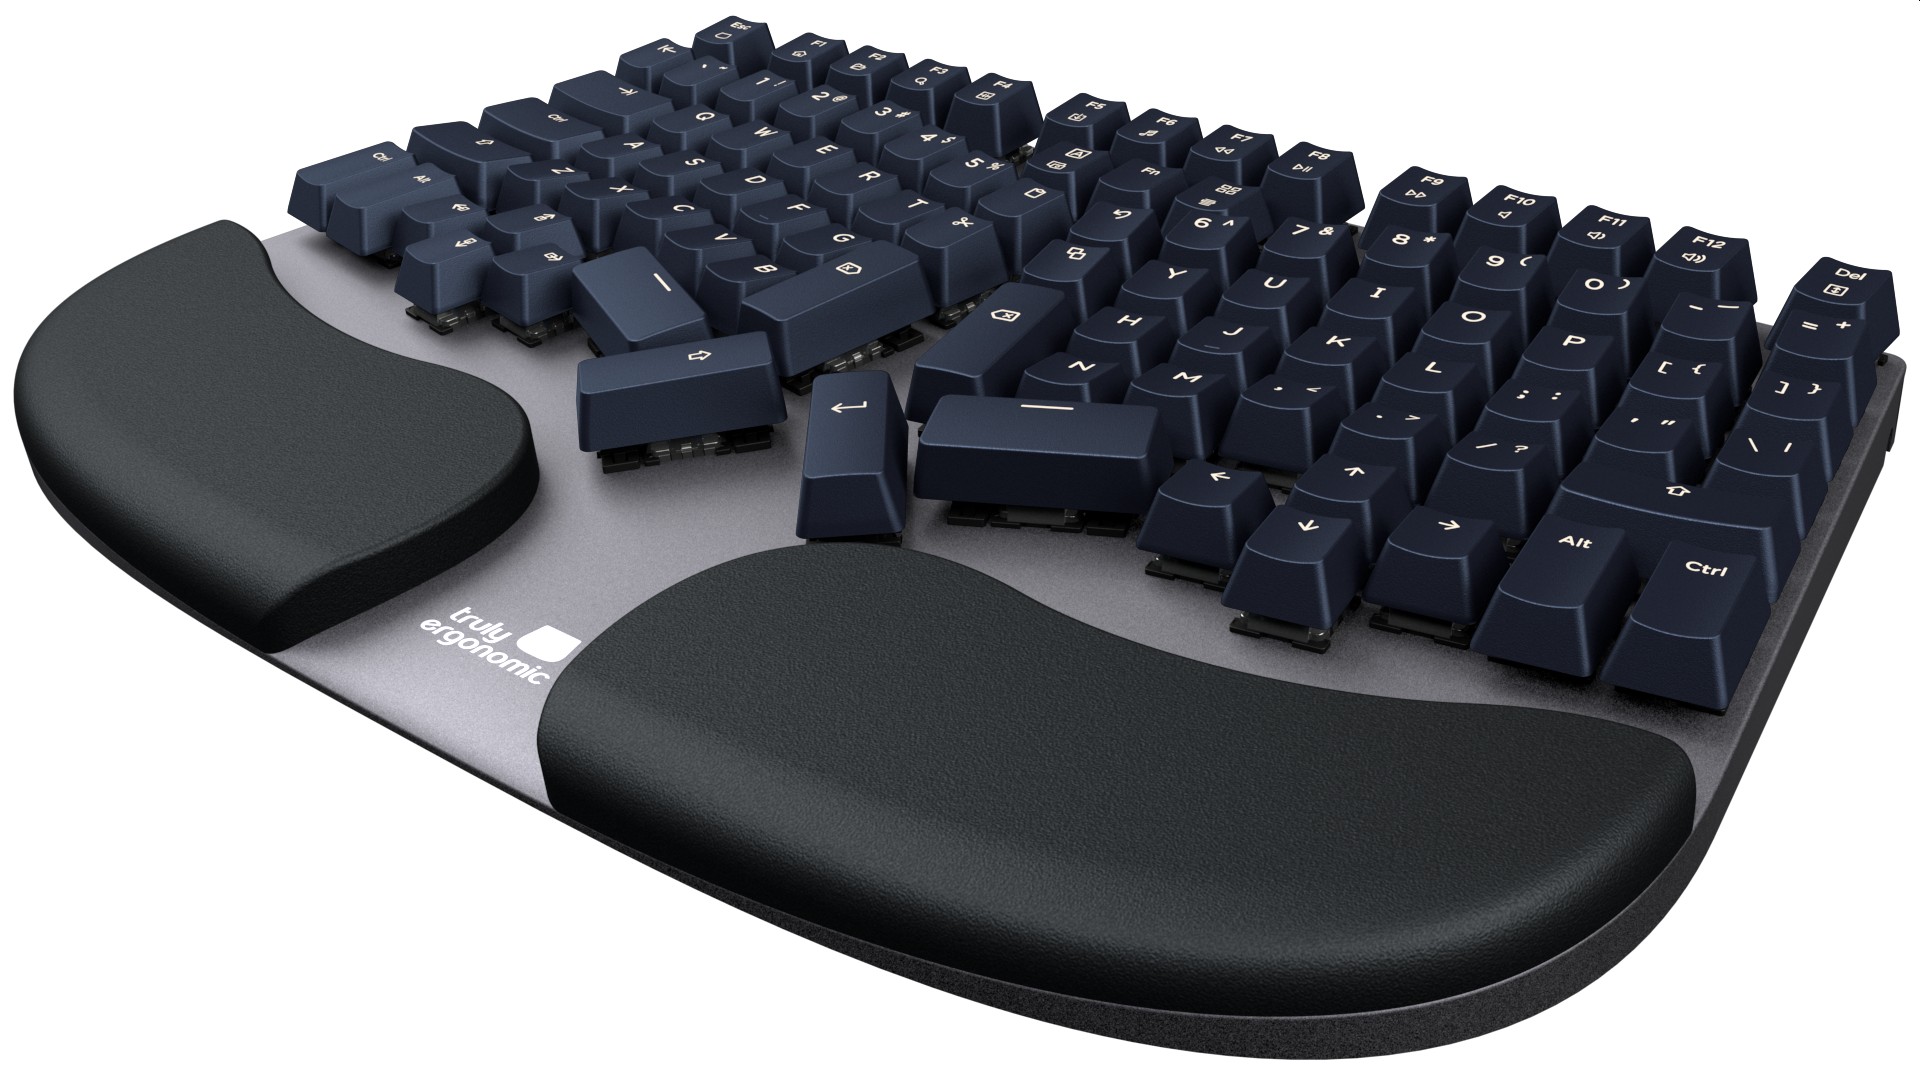 Truly Ergonomic Cleave Comfortable Typing